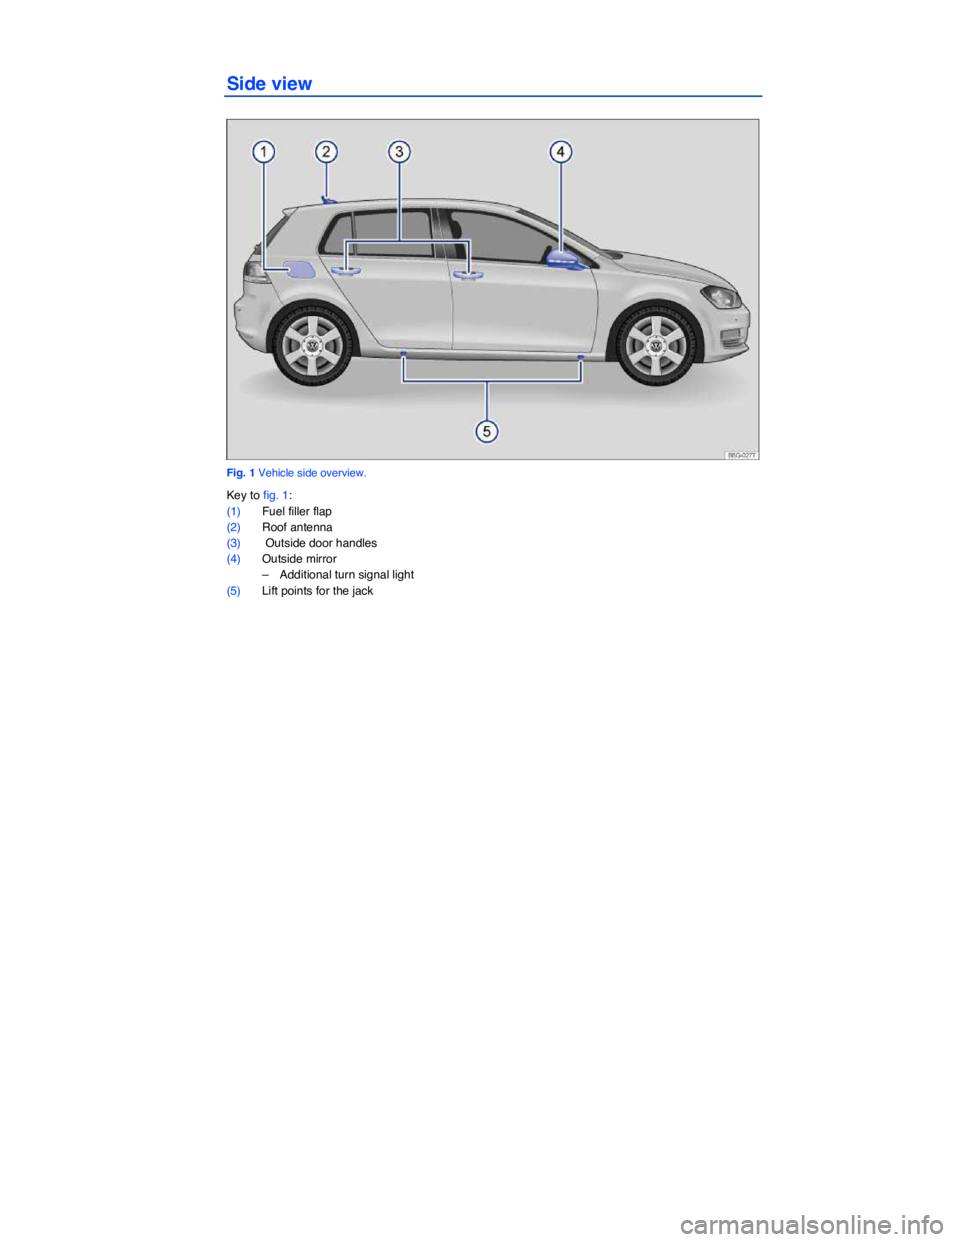 VOLKSWAGEN GOLF PLUS 2013  Owners Manual   
Side view 
 
Fig. 1 Vehicle side overview. 
Key to fig. 1: 
(1) Fuel filler flap 
(2) Roof antenna  
(3)  Outside door handles  
(4) Outside mirror  
–  Additional turn signal light  
(5) Lift po